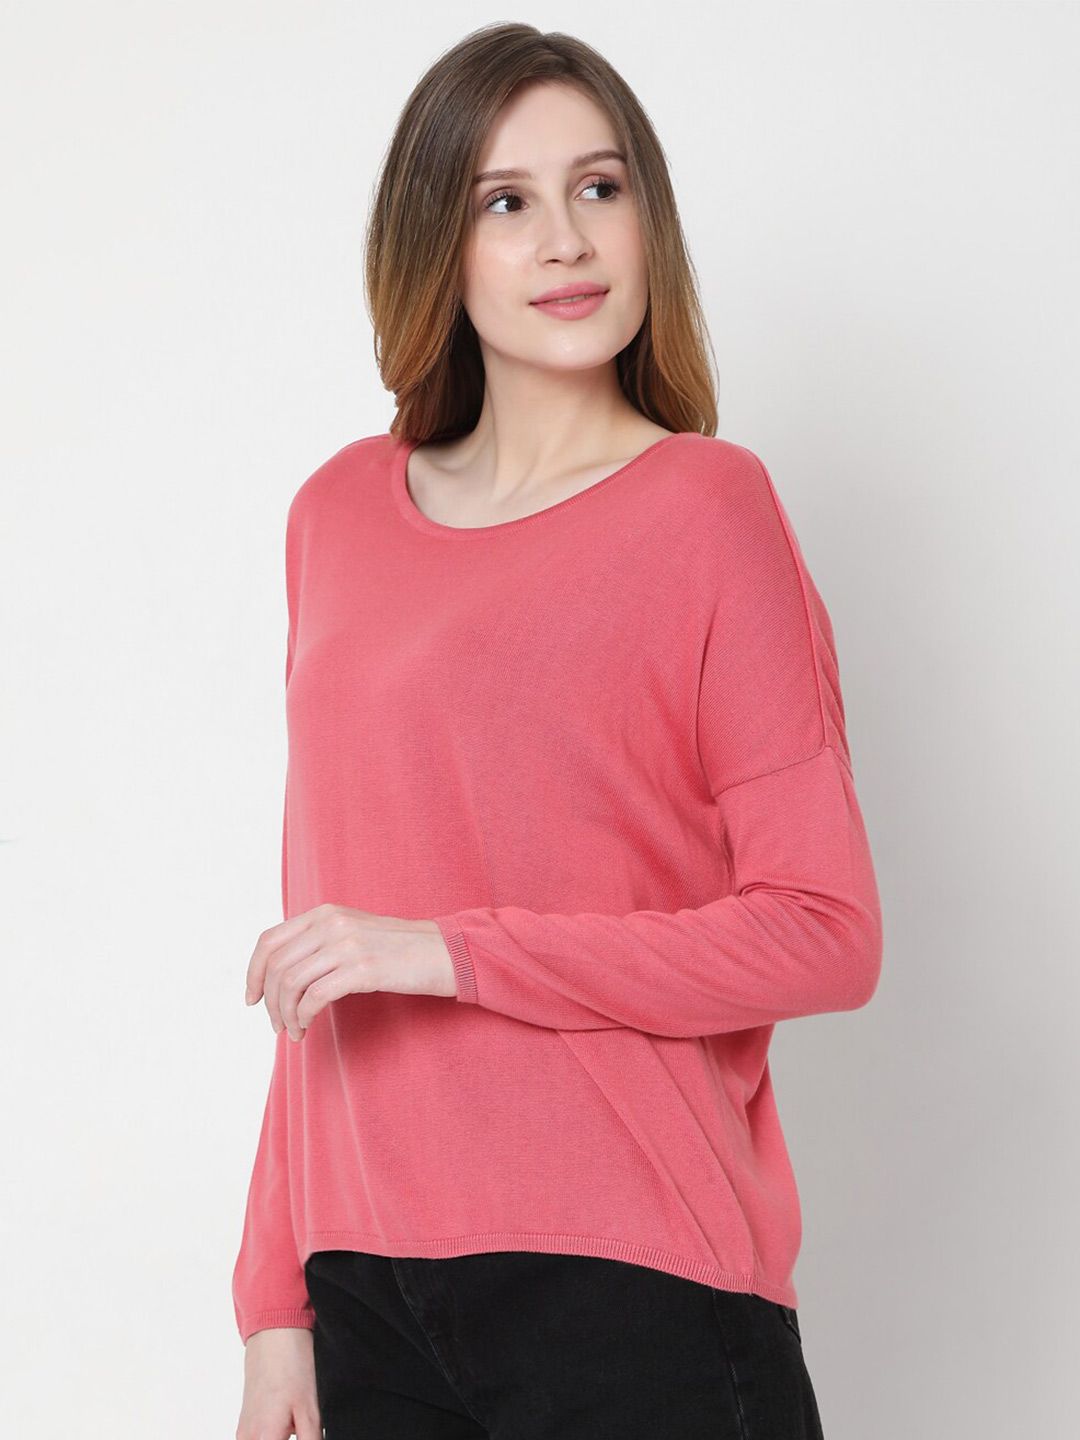 Vero Moda Women Pink Solid Extended Sleeve Pullover Price in India